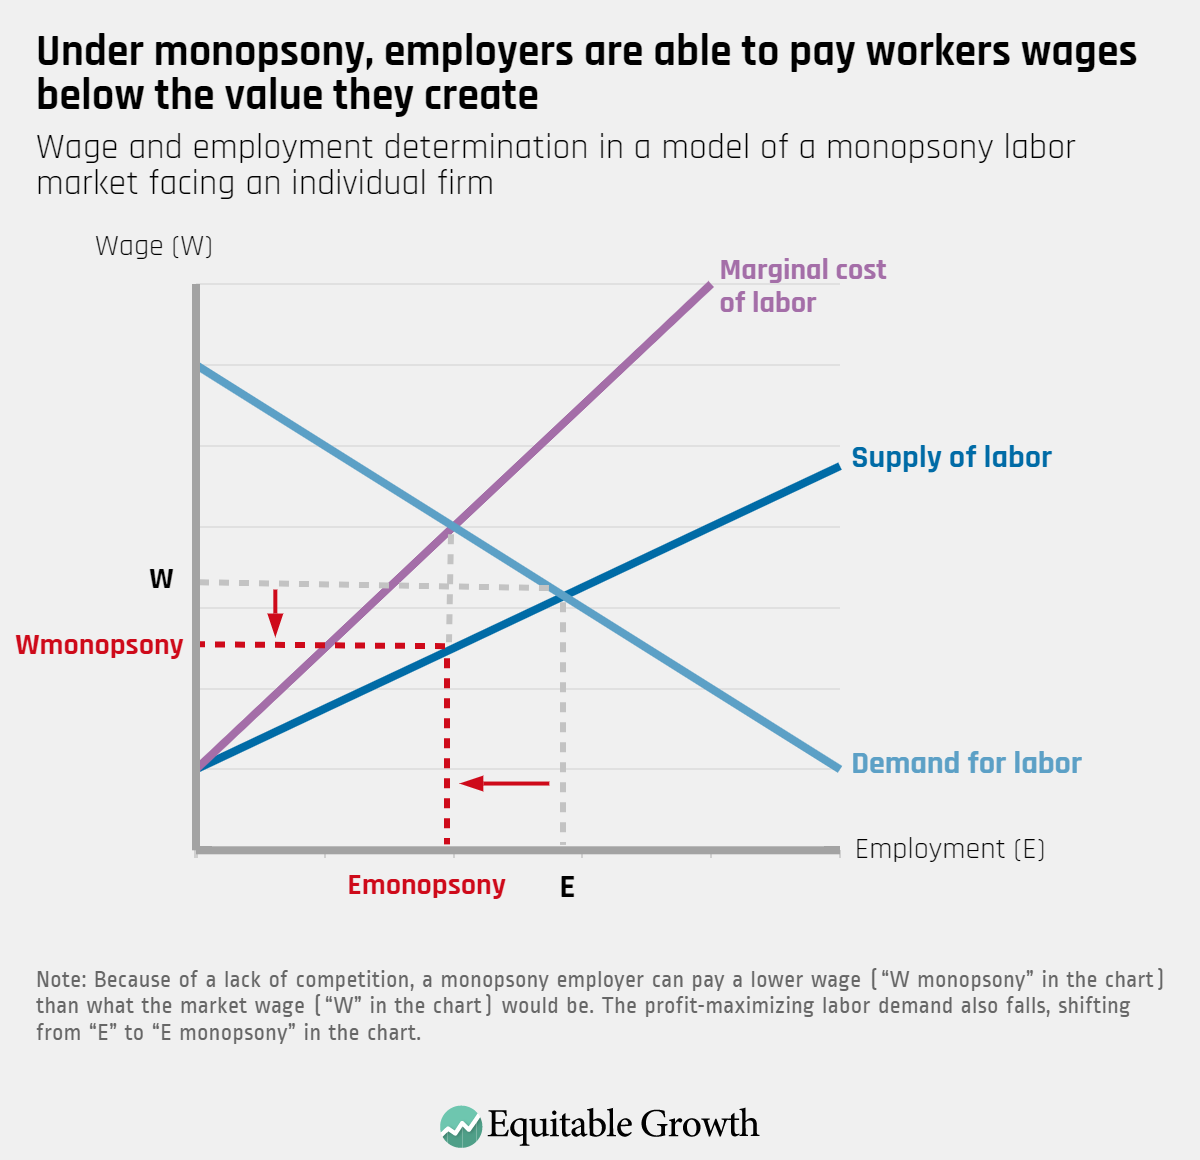 Wage and employment determination in a model of a monopsony labor market facing an individual firm